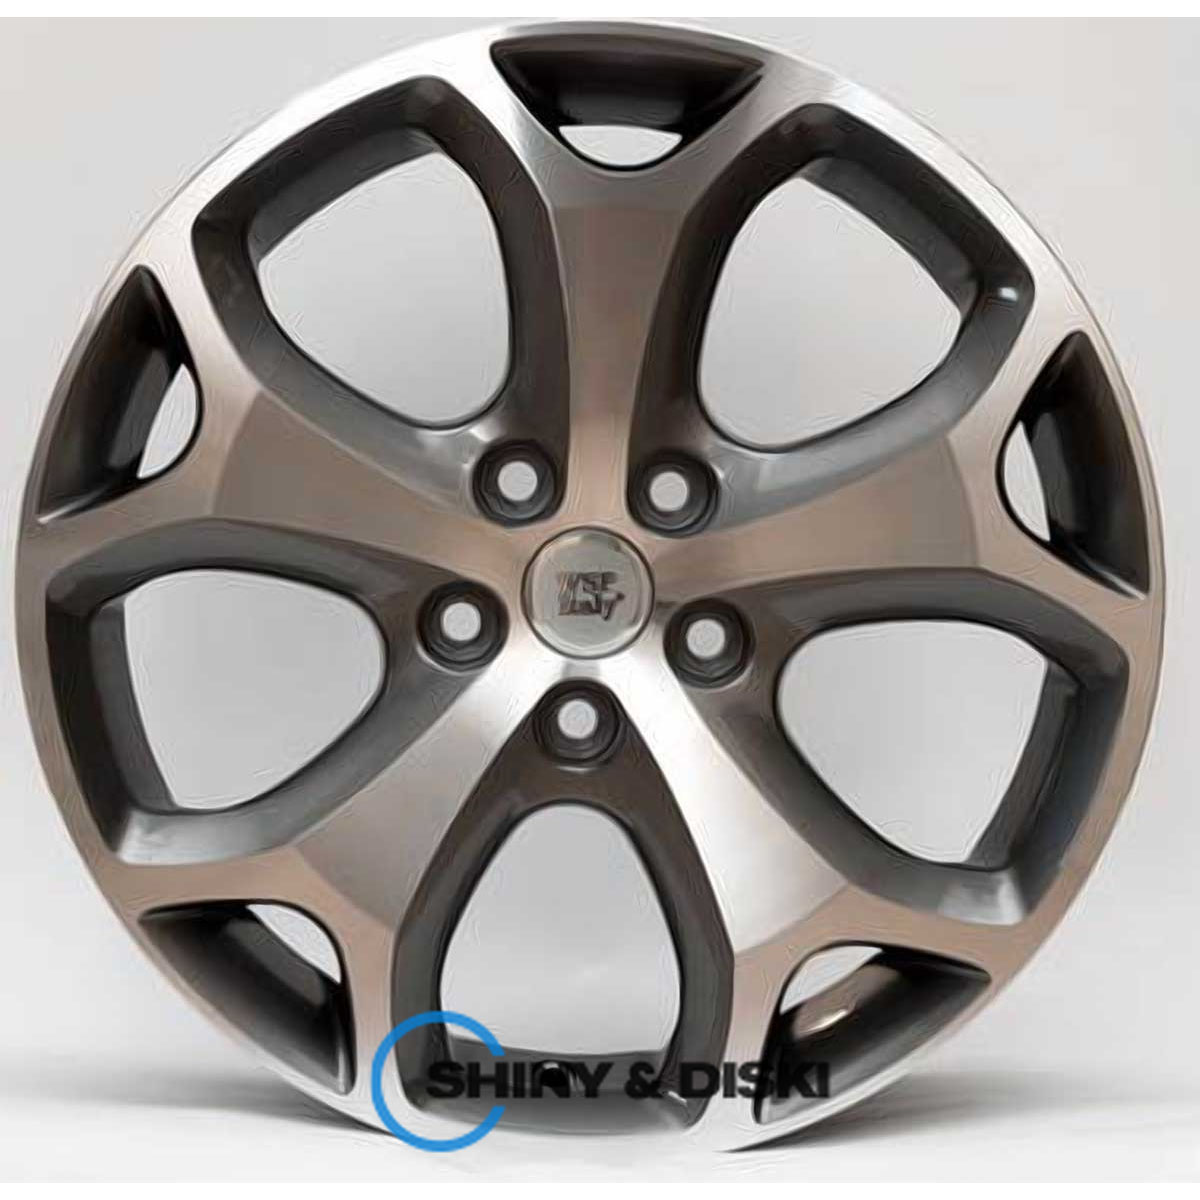 wsp italy ford w950 max-mexico hs r18 w8 pcd5x108 et55 dia63.4